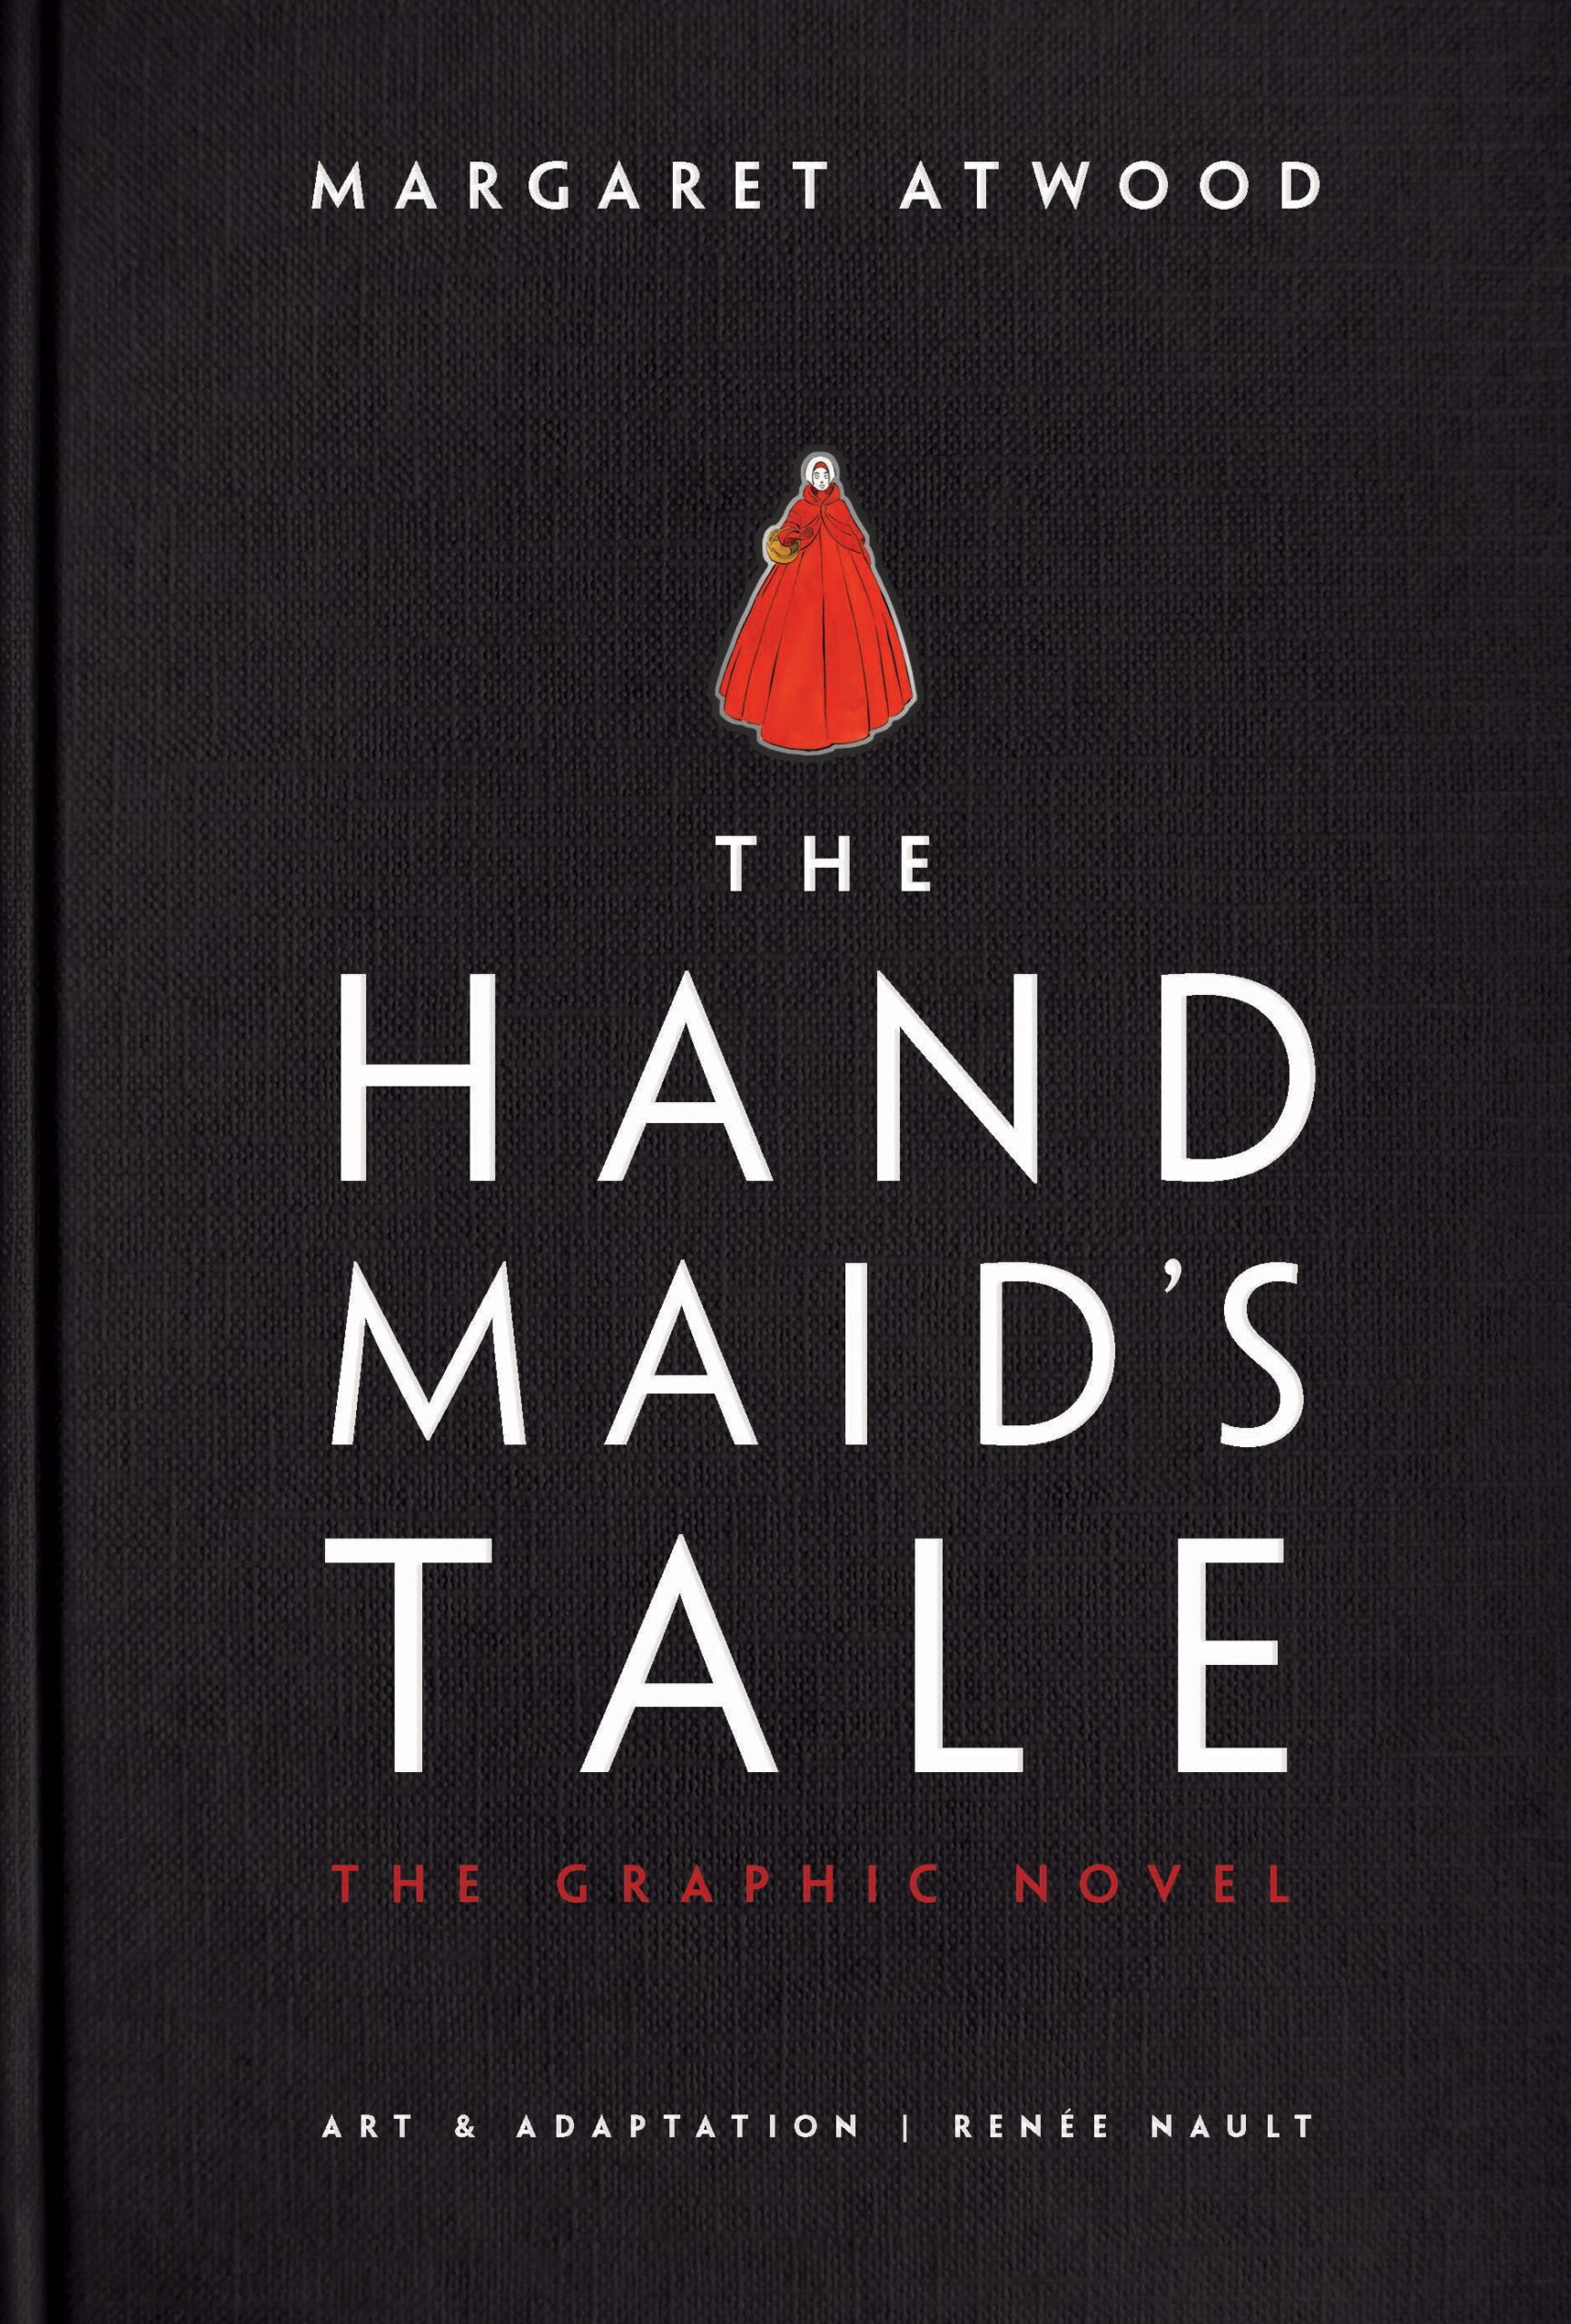 Exclusive pages from “The Handmaid’s Tale” graphic novel